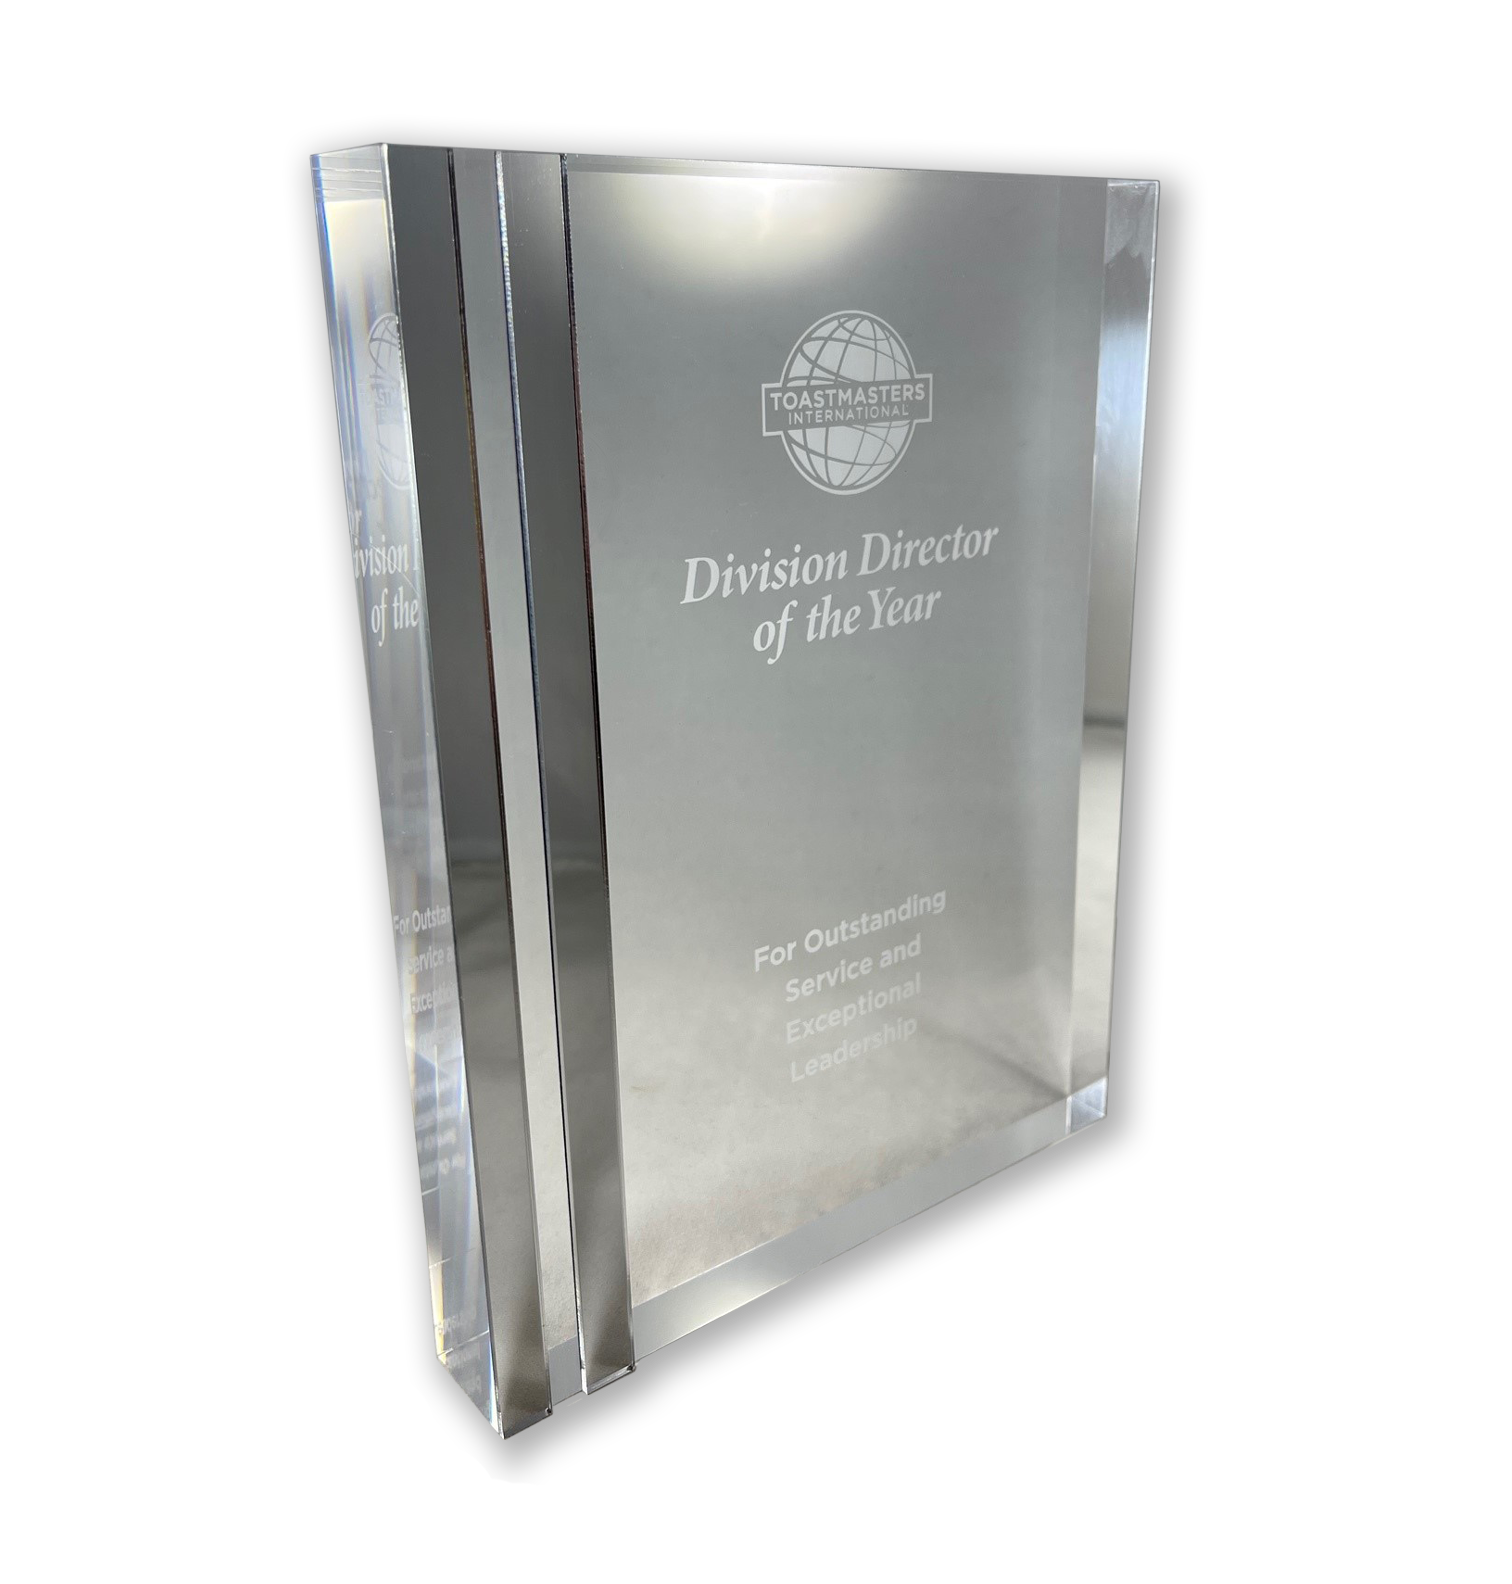 Division-Director-of-the-Year-Award-Toastmasters